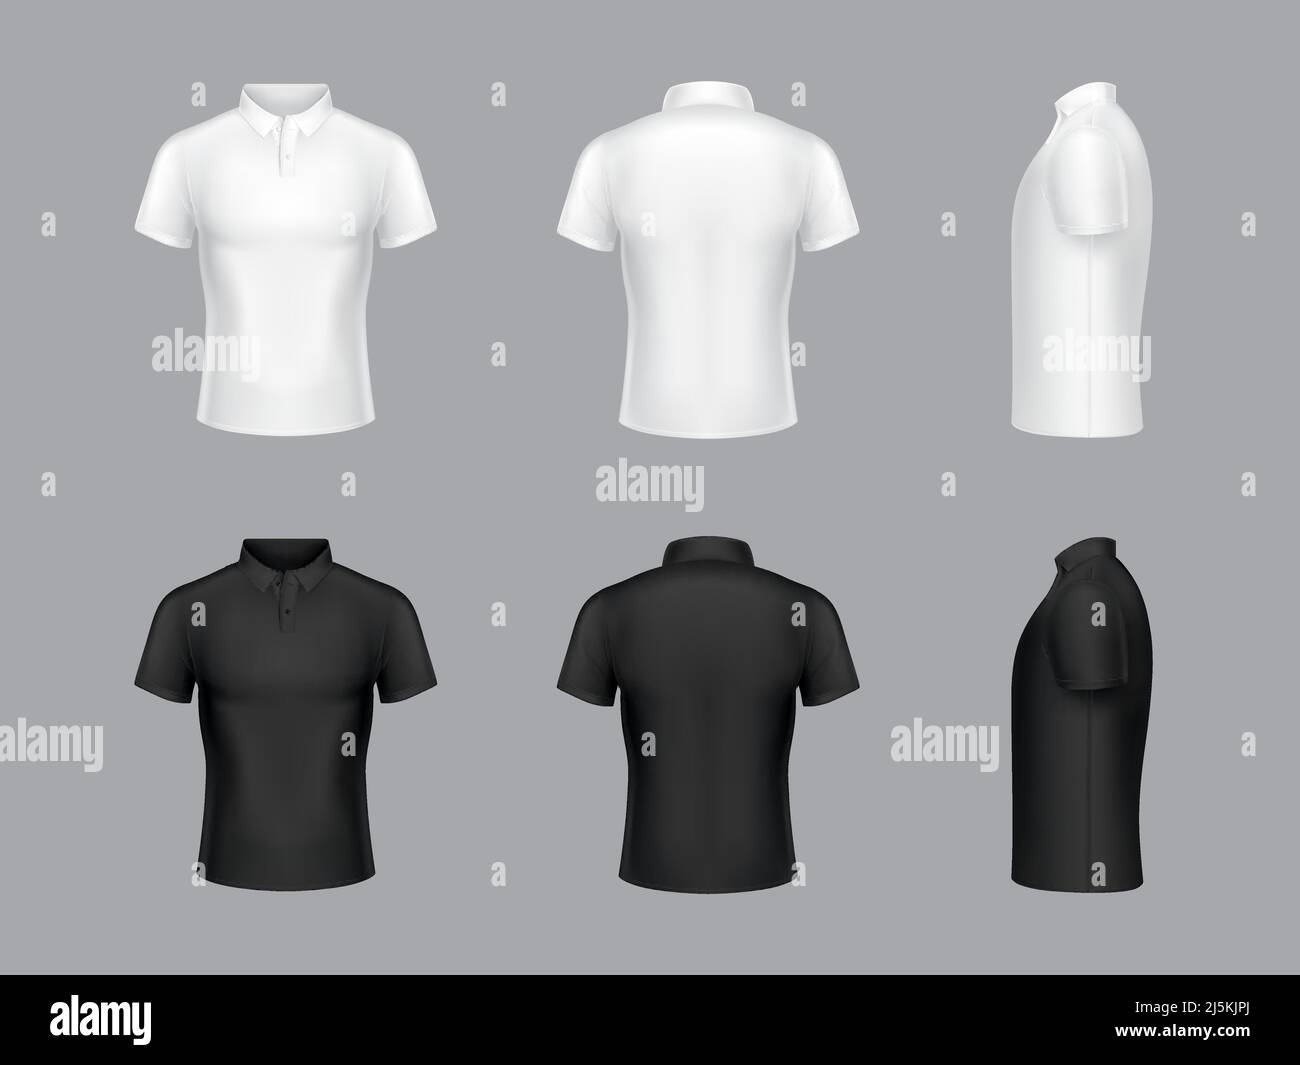 Vector collection of 3d realistic white and black polo t-shirts. Short sleeves, fashion design. Clothes in different views - side, back and front. Man Stock Vector